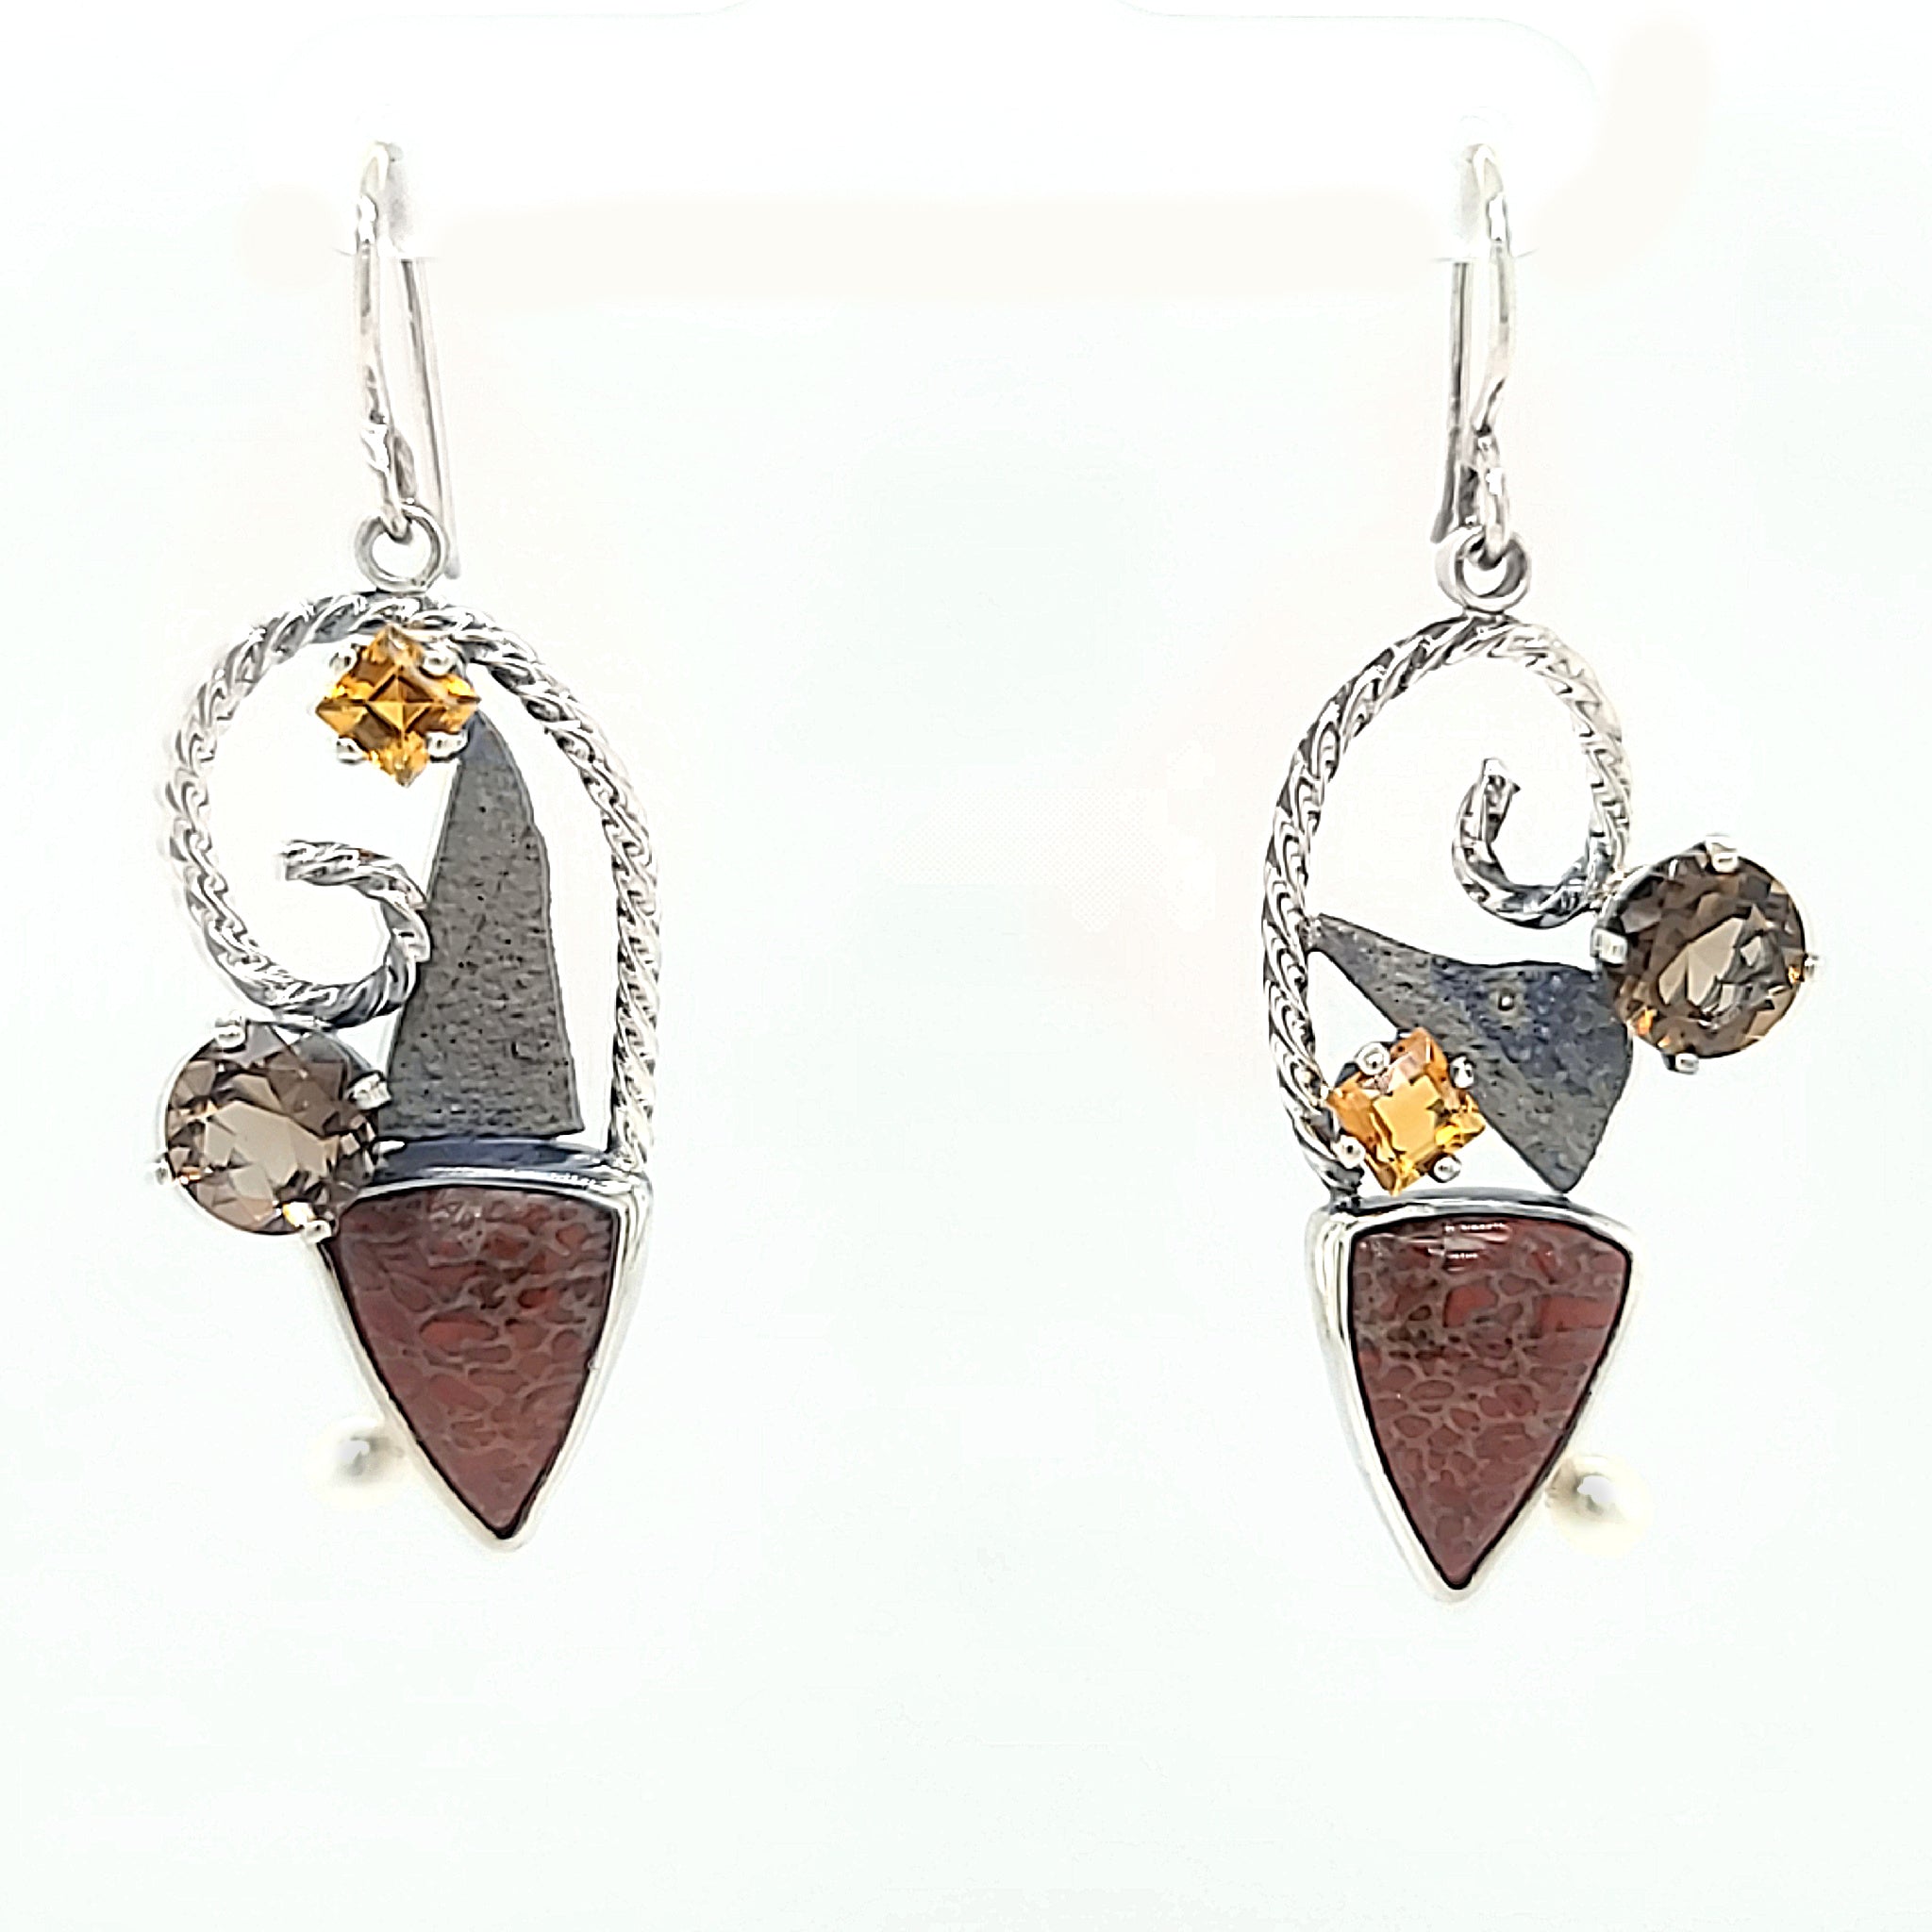 Agatized Dinosaur Bone with Citrine, Smoky Quartz and Freshwater Pearls. Set in Sterling Silver with Shibuichi earrings.